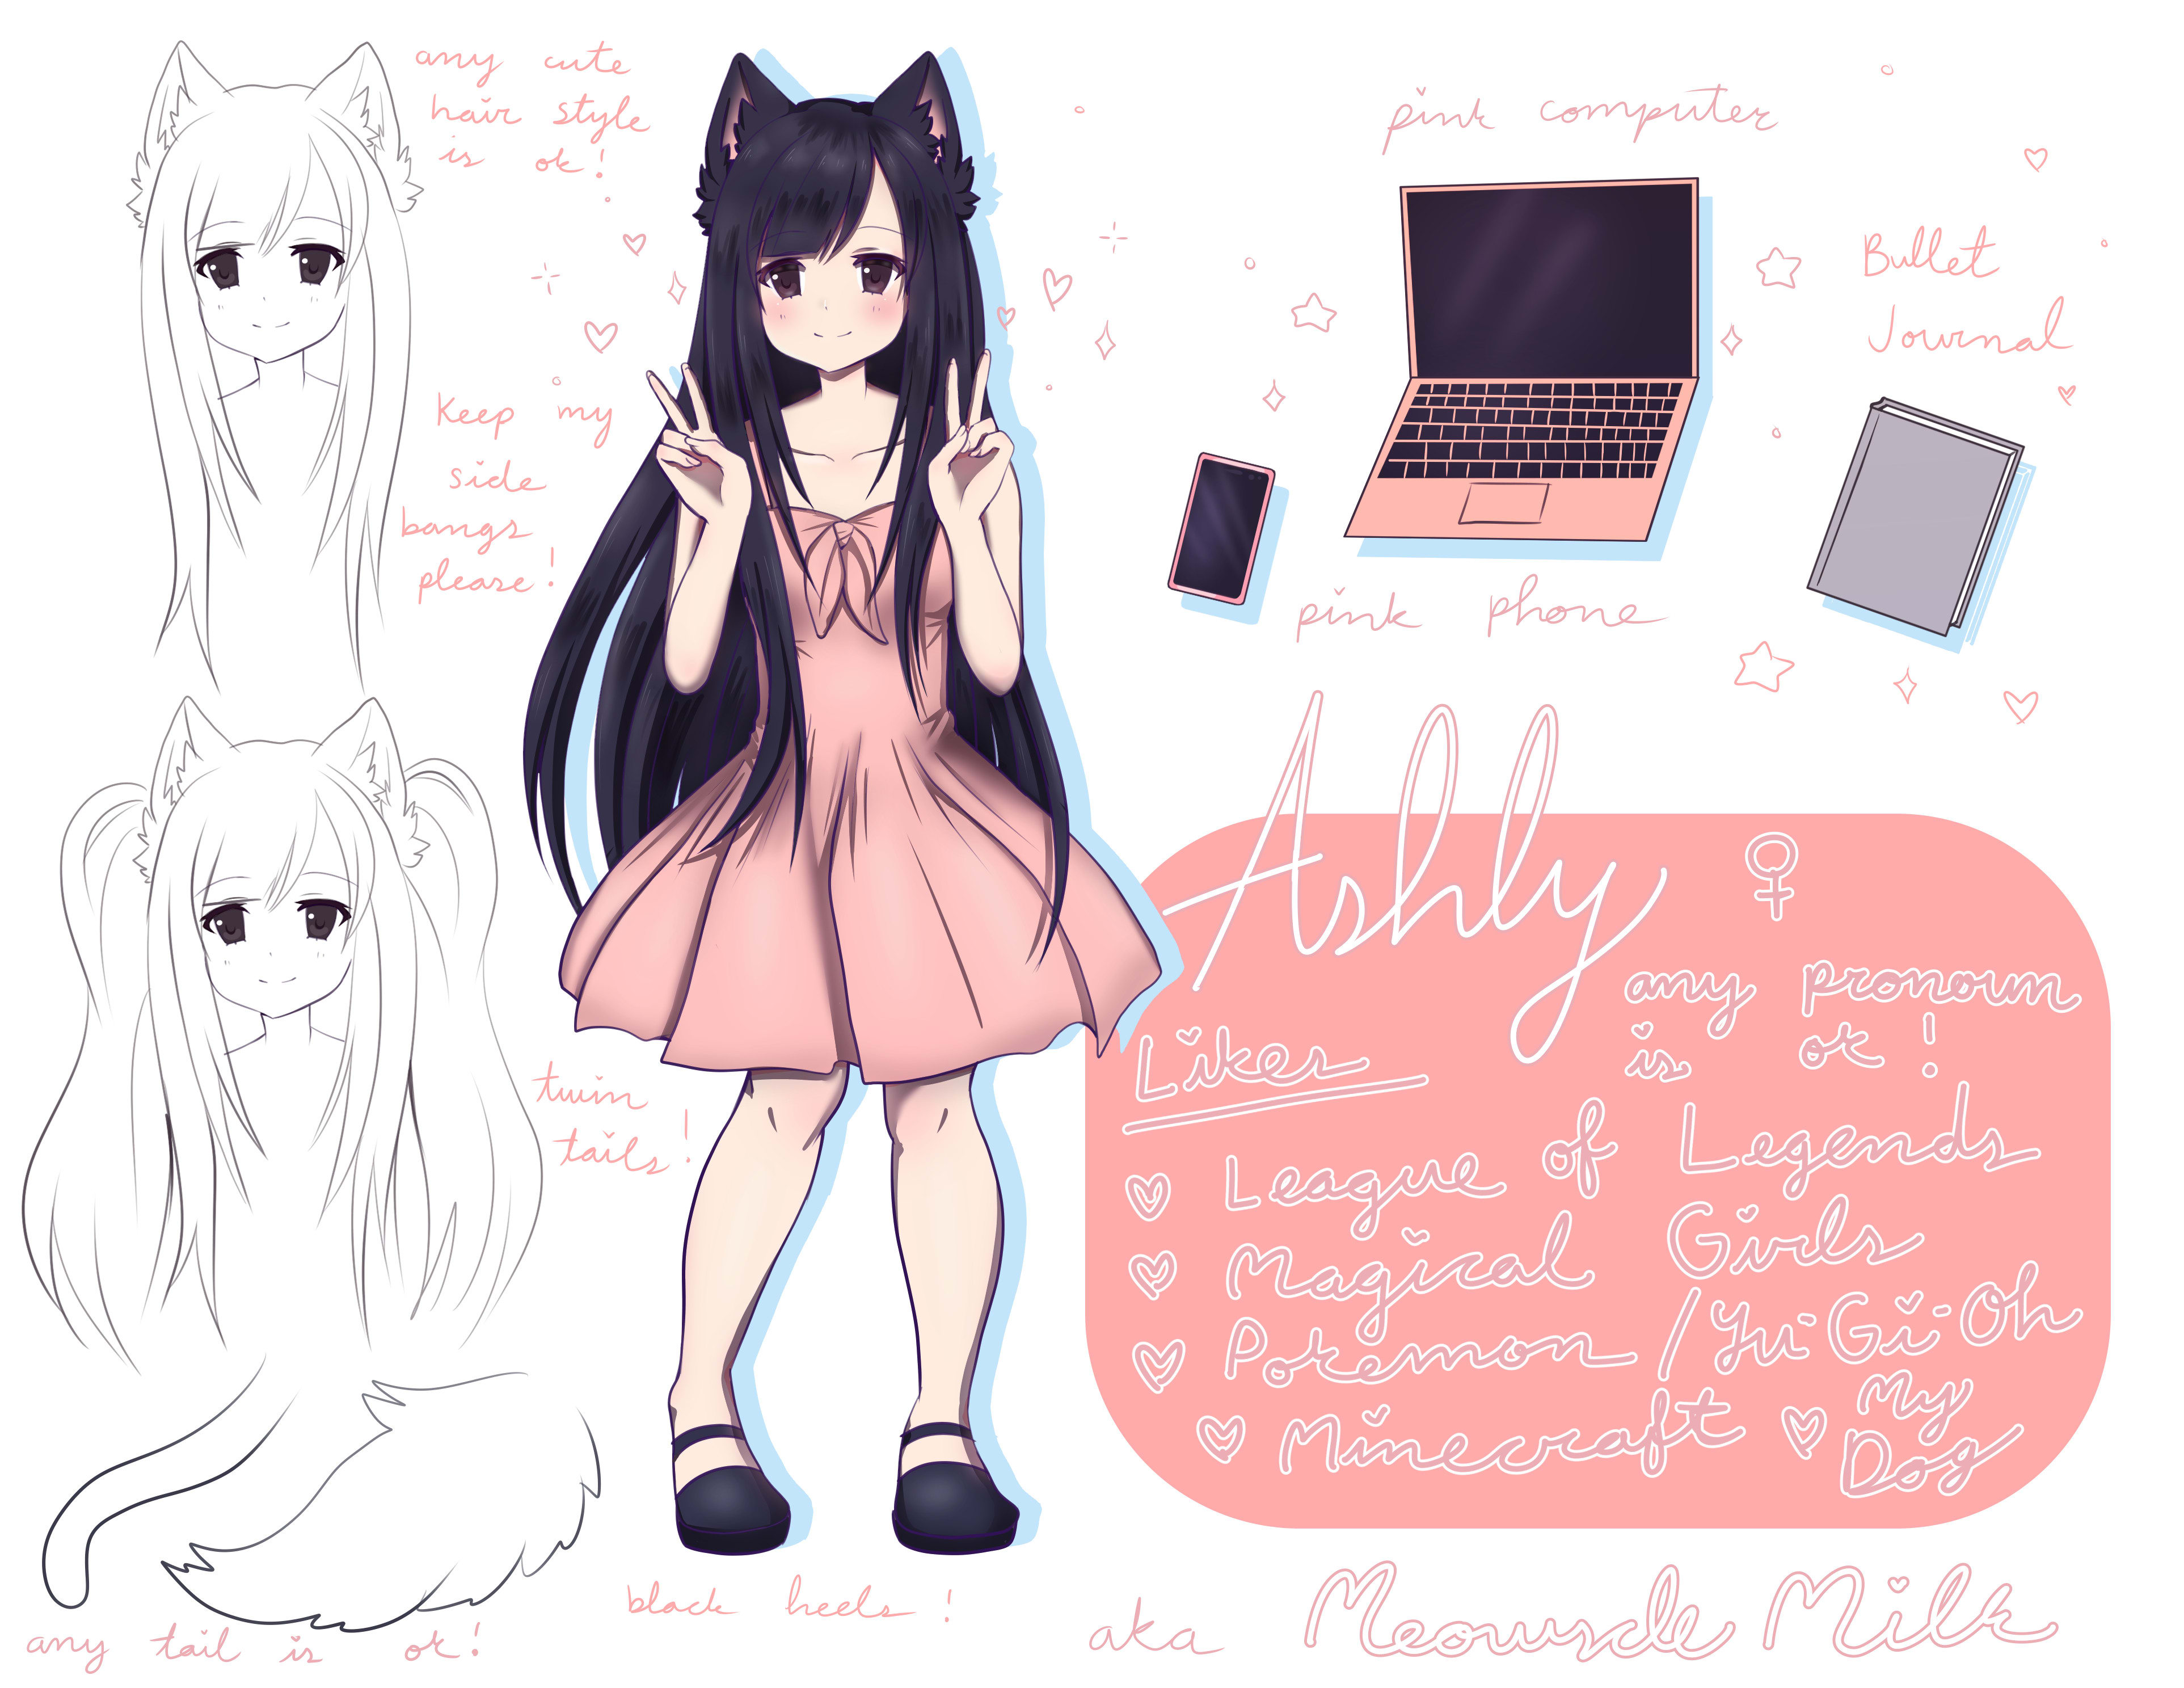 Draw Cute Reference Sheet For Your Character Or Ocs By Meowsclemilk Fiverr